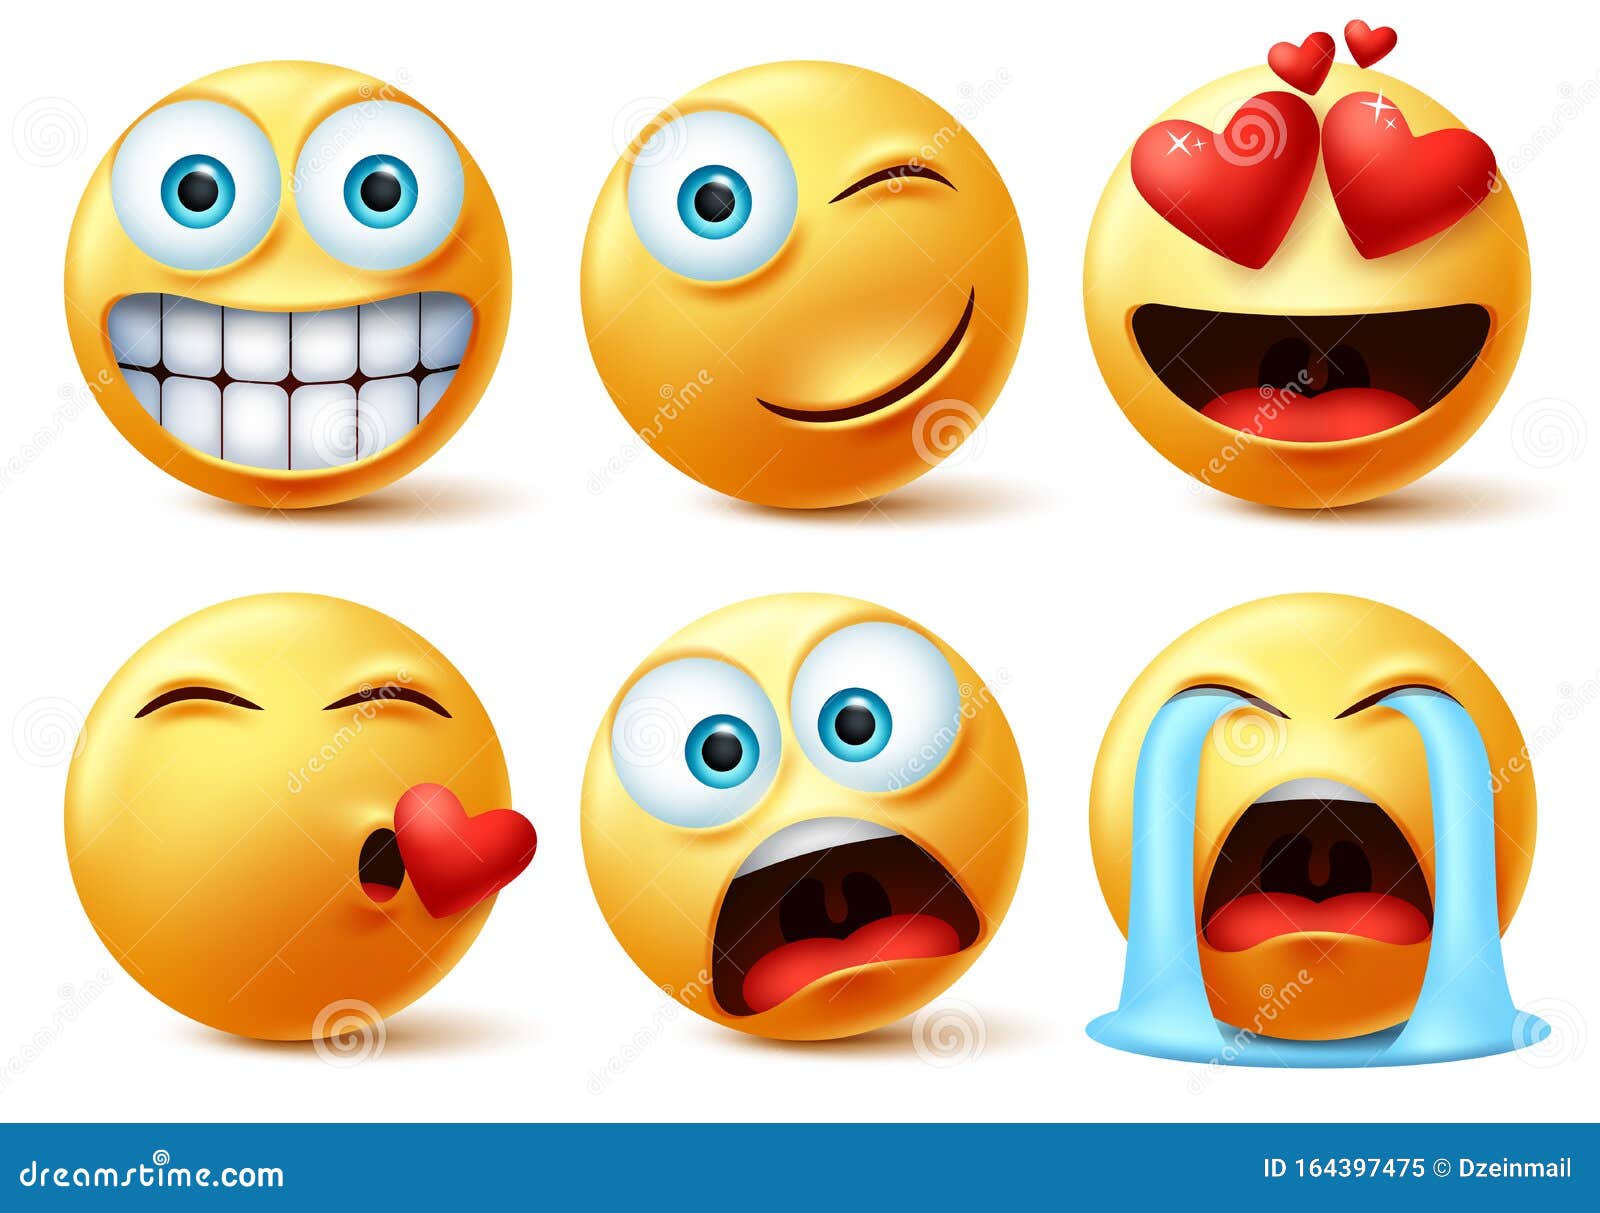 smileys emojis and emoticons face  set. smiley icon or emoticon of cute yellow faces in kissing, in love, crying, surprise.